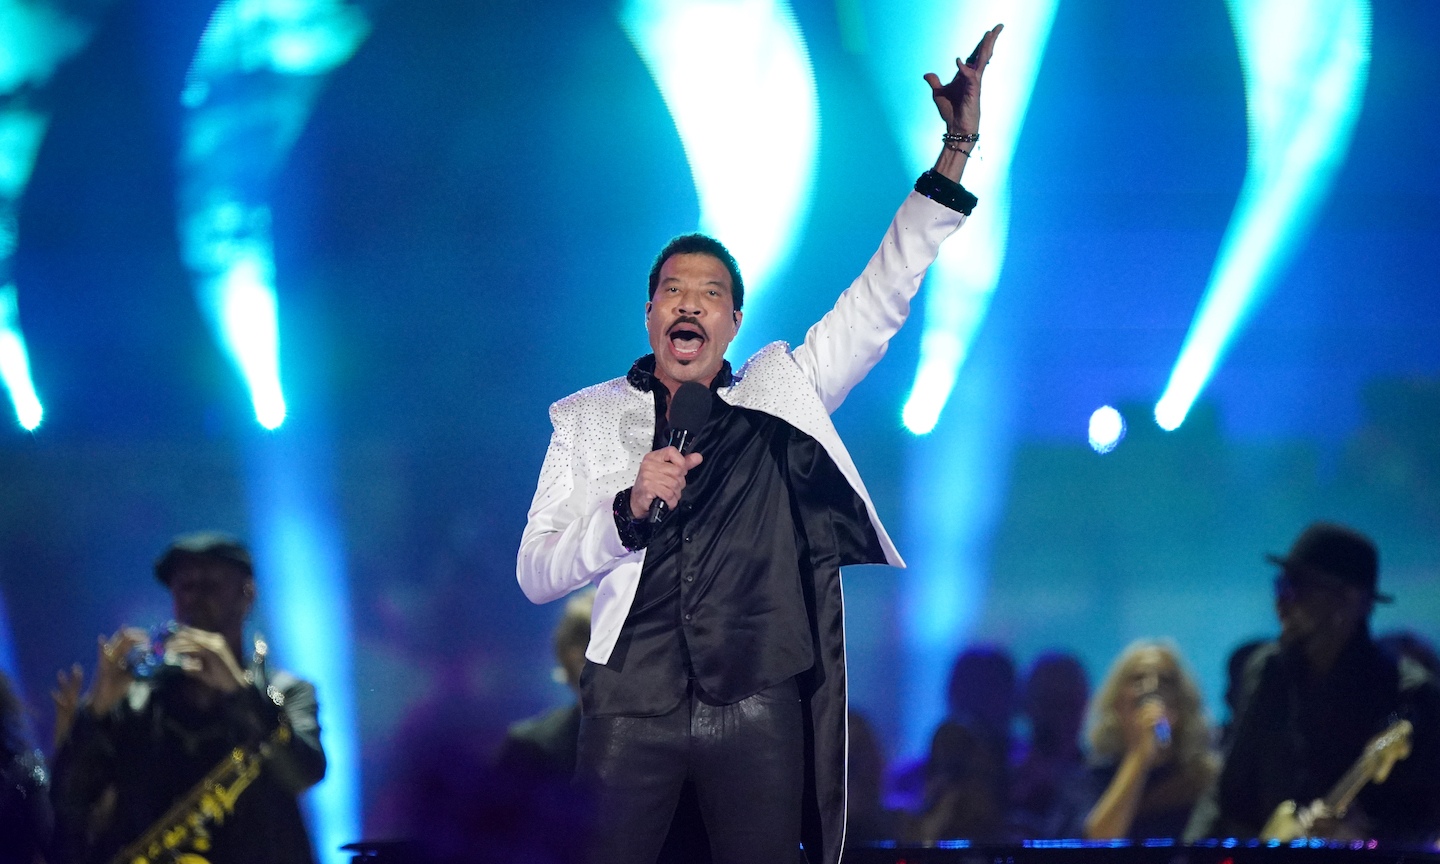 Lionel Richie And Vibee Announce ‘Dancing On The Sand’ Expertise